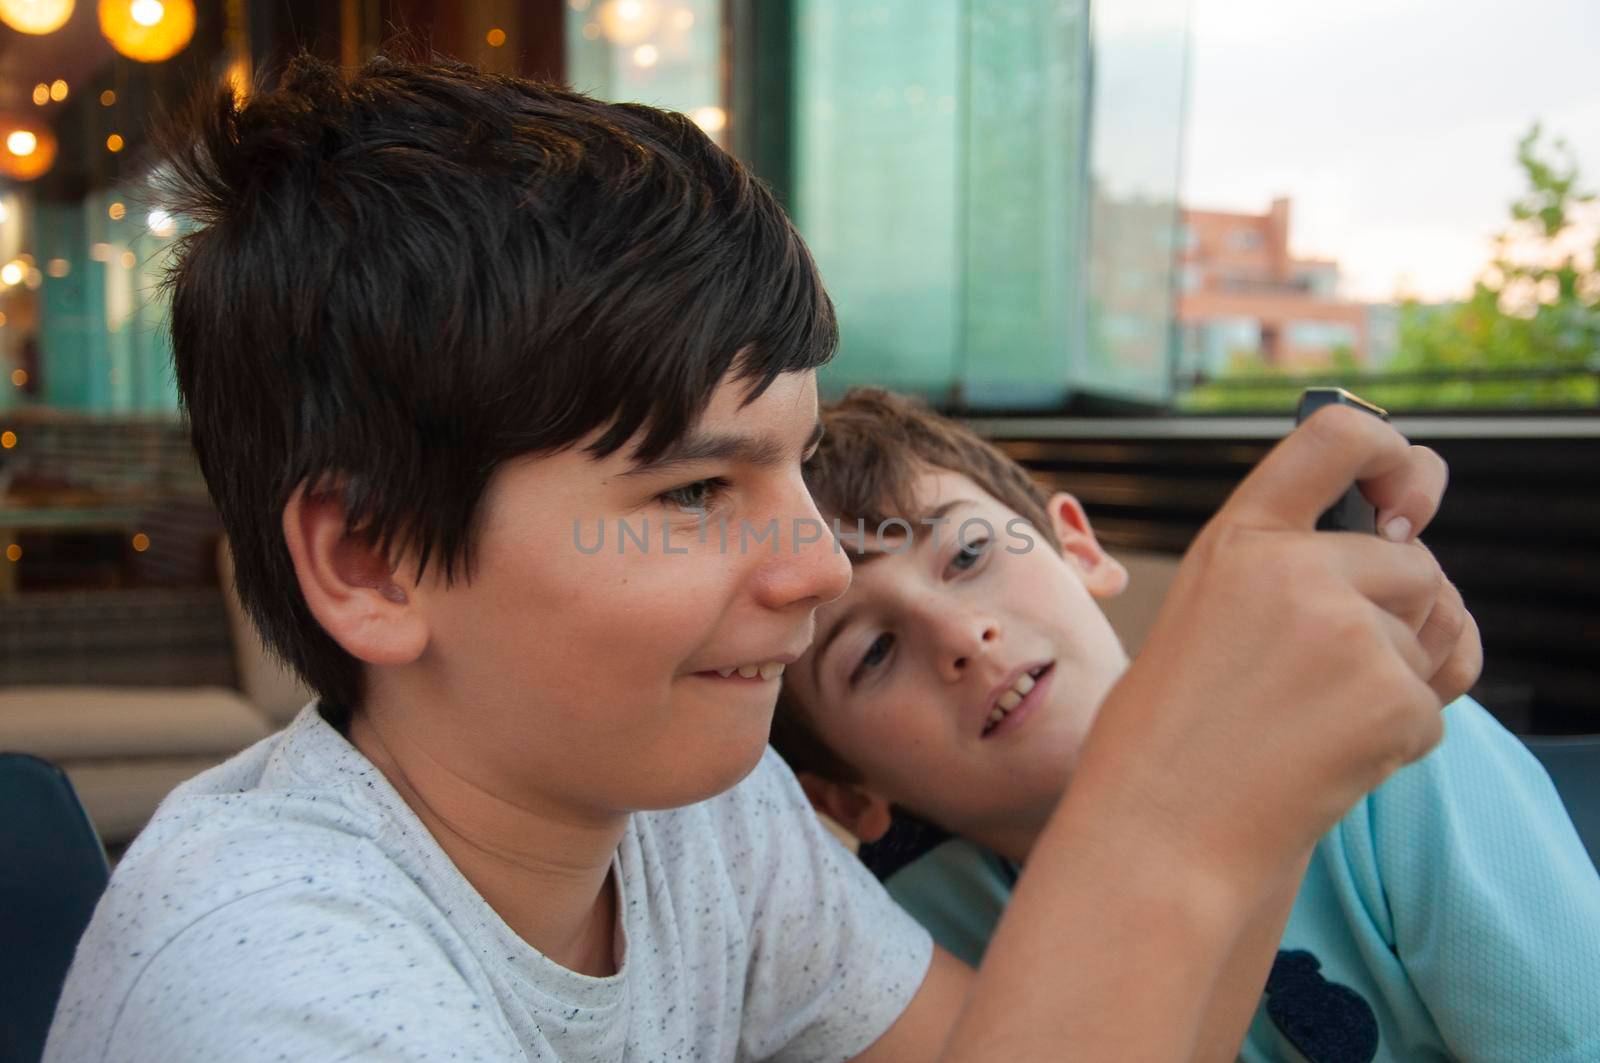 Two boy enjoy playing online games. One boy is watching and waiting. Young boys use their phones for learning in a bar or at home